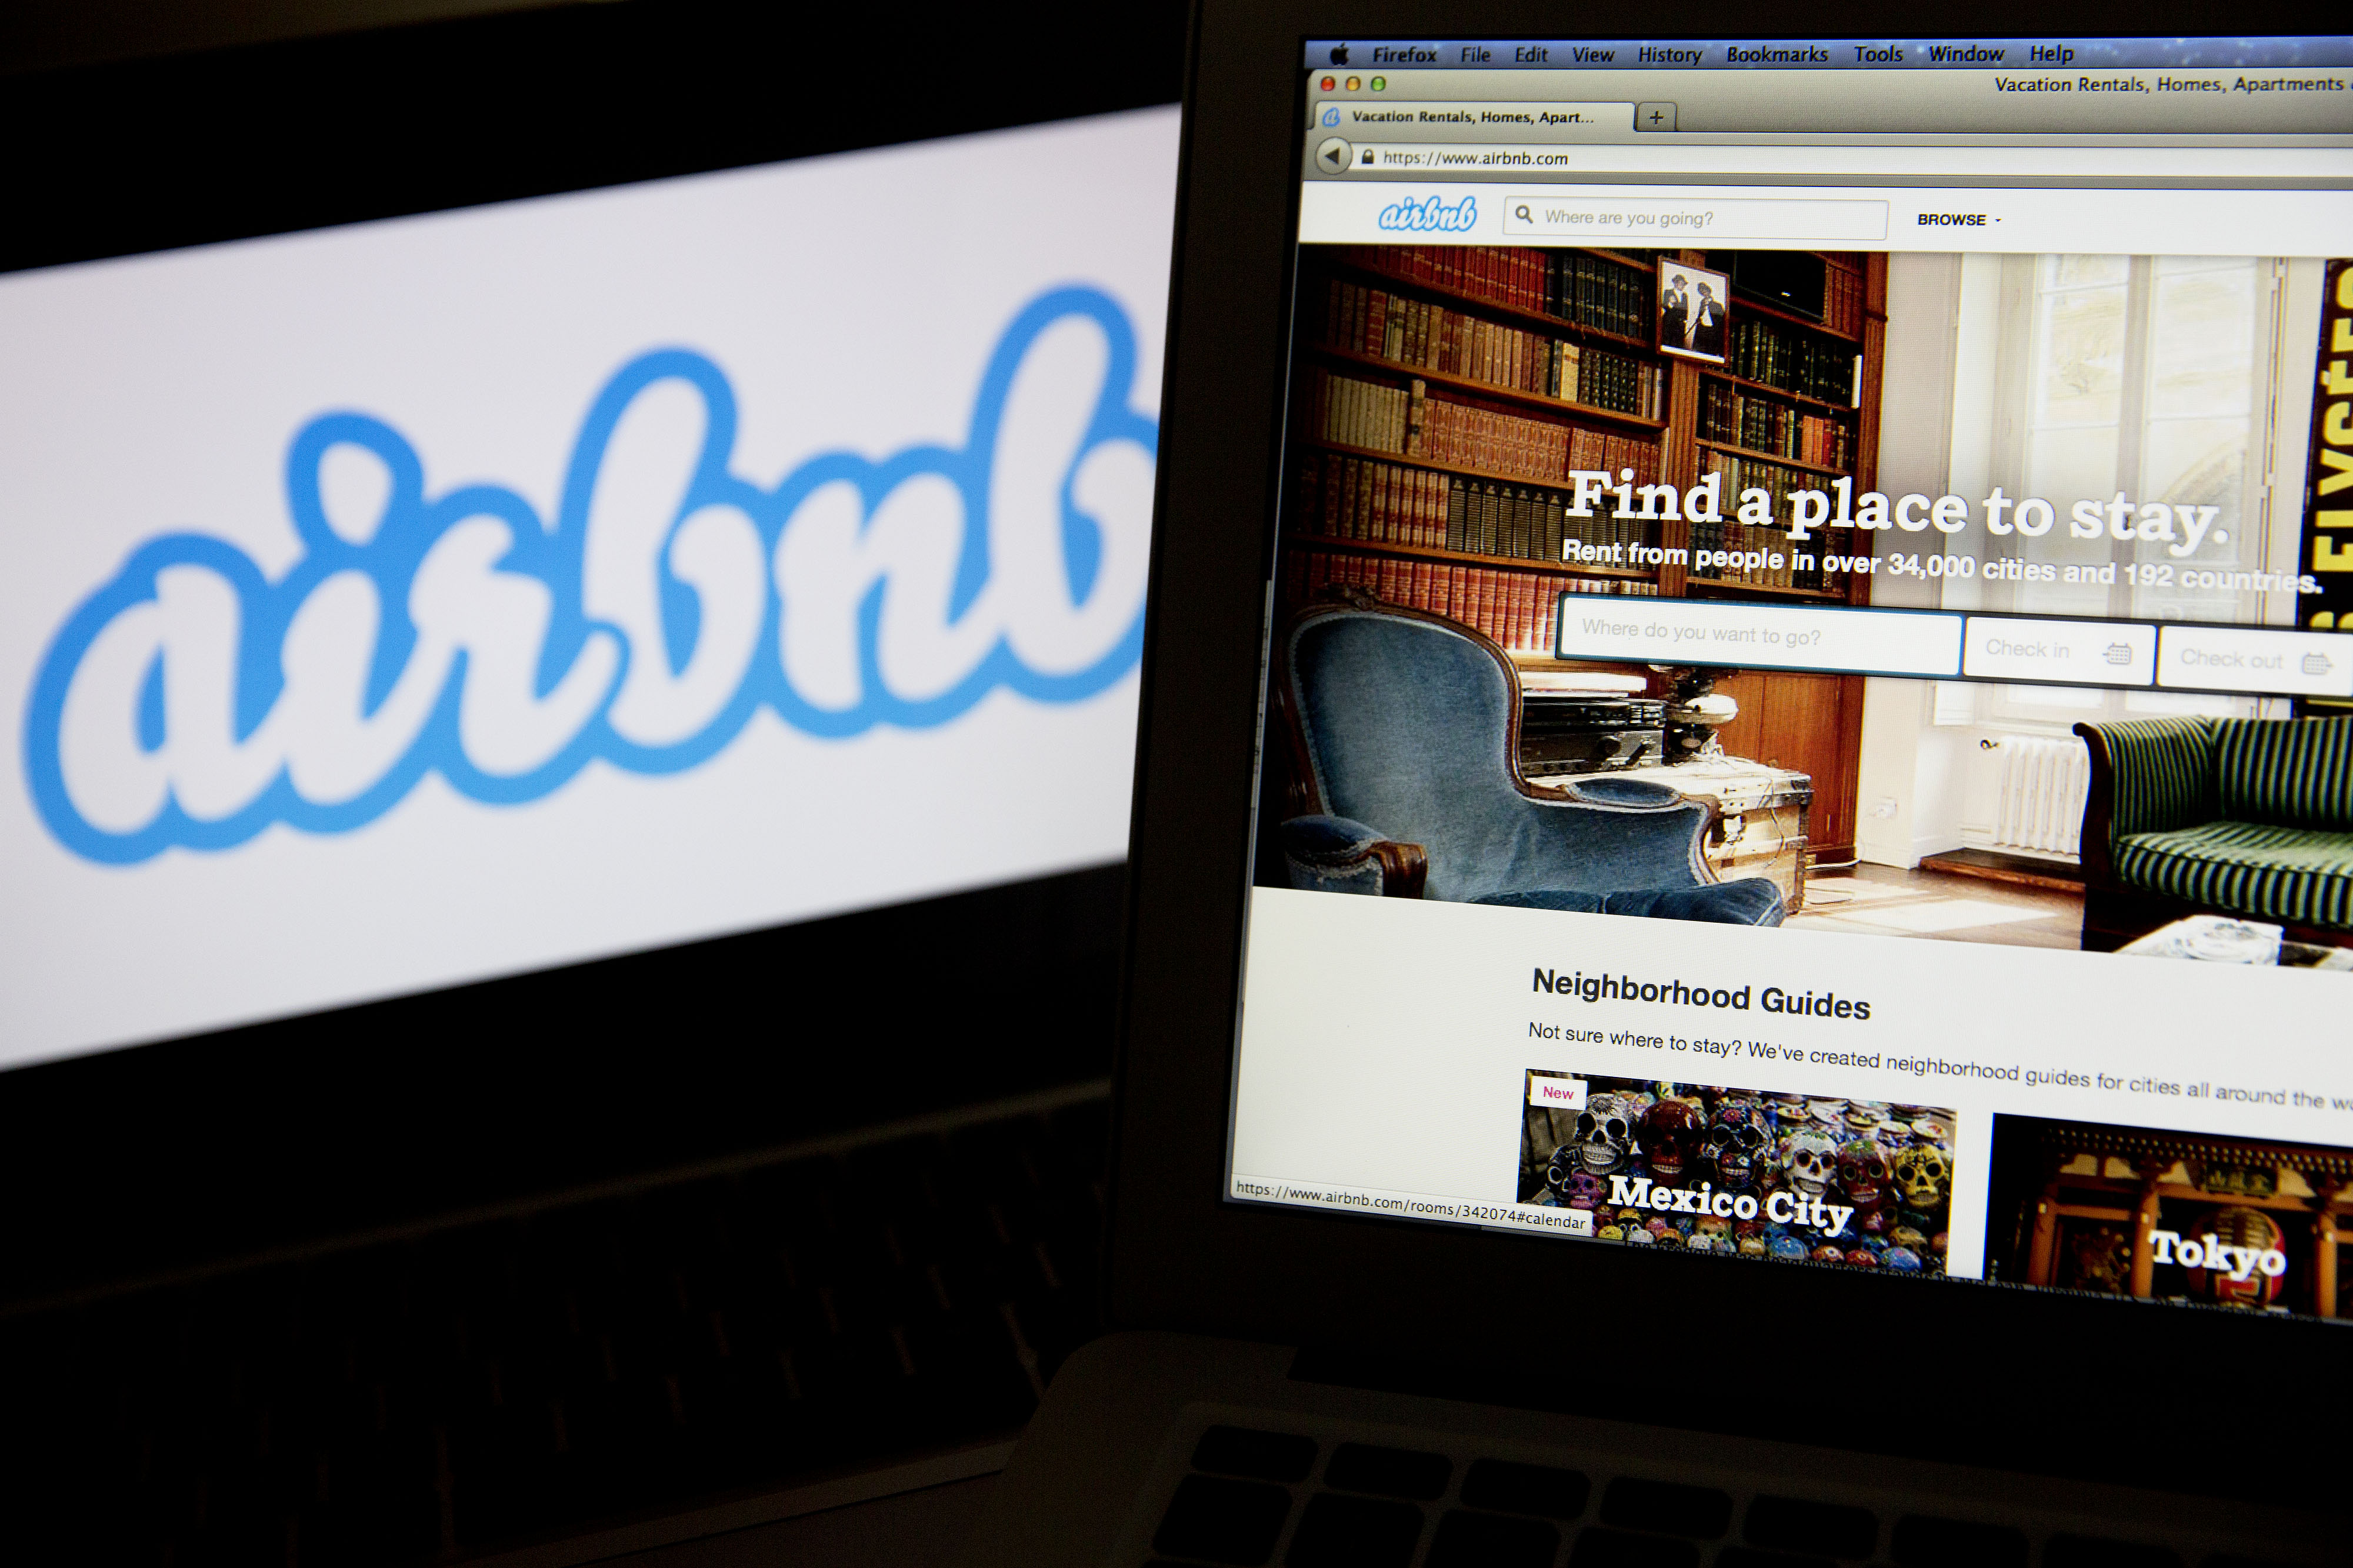 The Airbnb Inc. logo and website are displayed on laptop computers in this arranged photograph in Washington, D.C., U.S., on Friday, March 21, 2014.